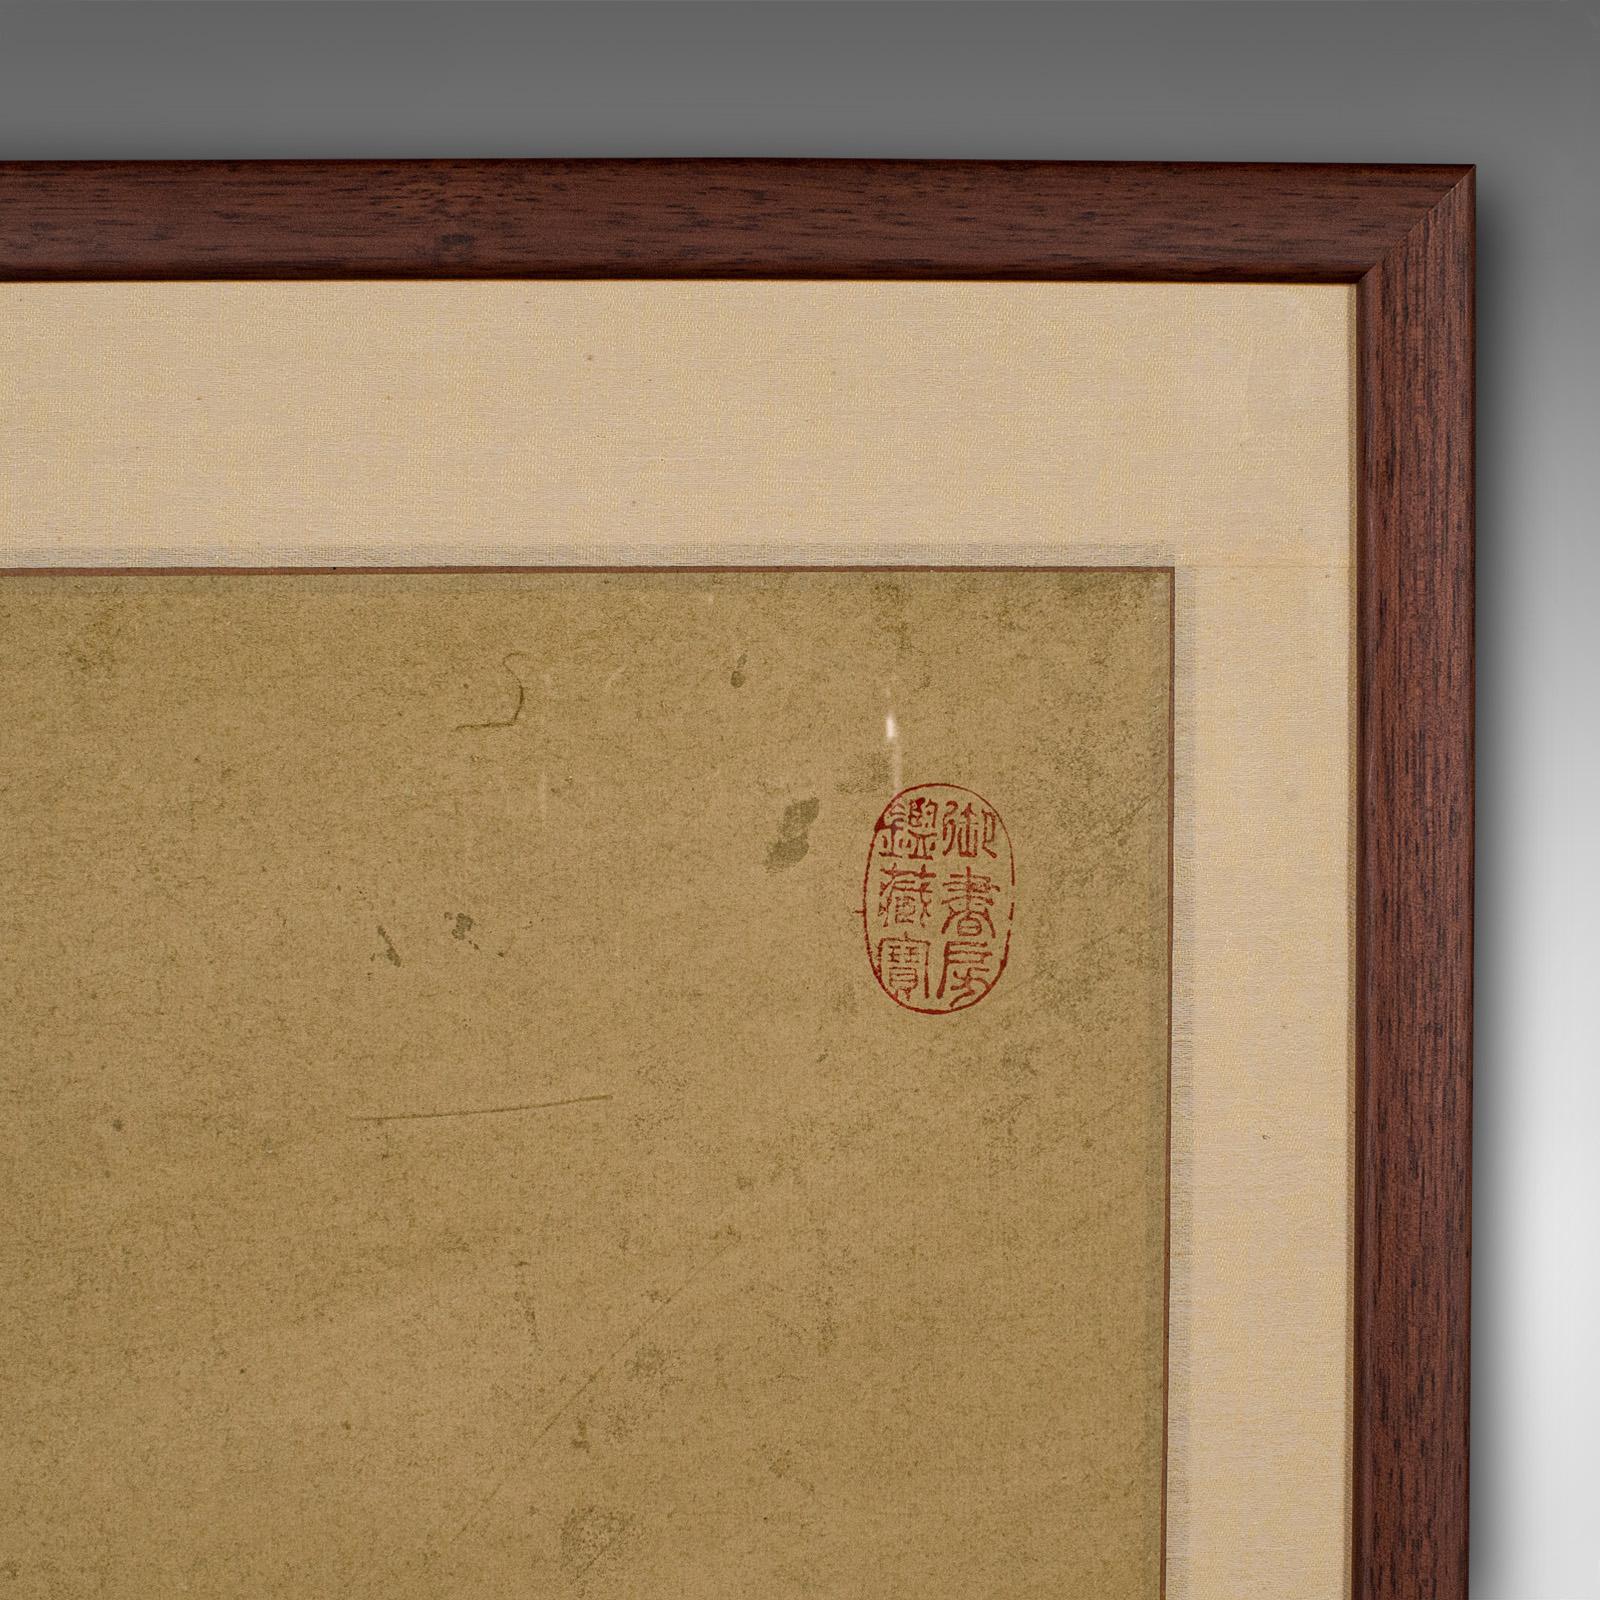 Vintage Framed Artwork, Oriental, Ink on Paper, Chinese School, Mid 20th Century For Sale 2